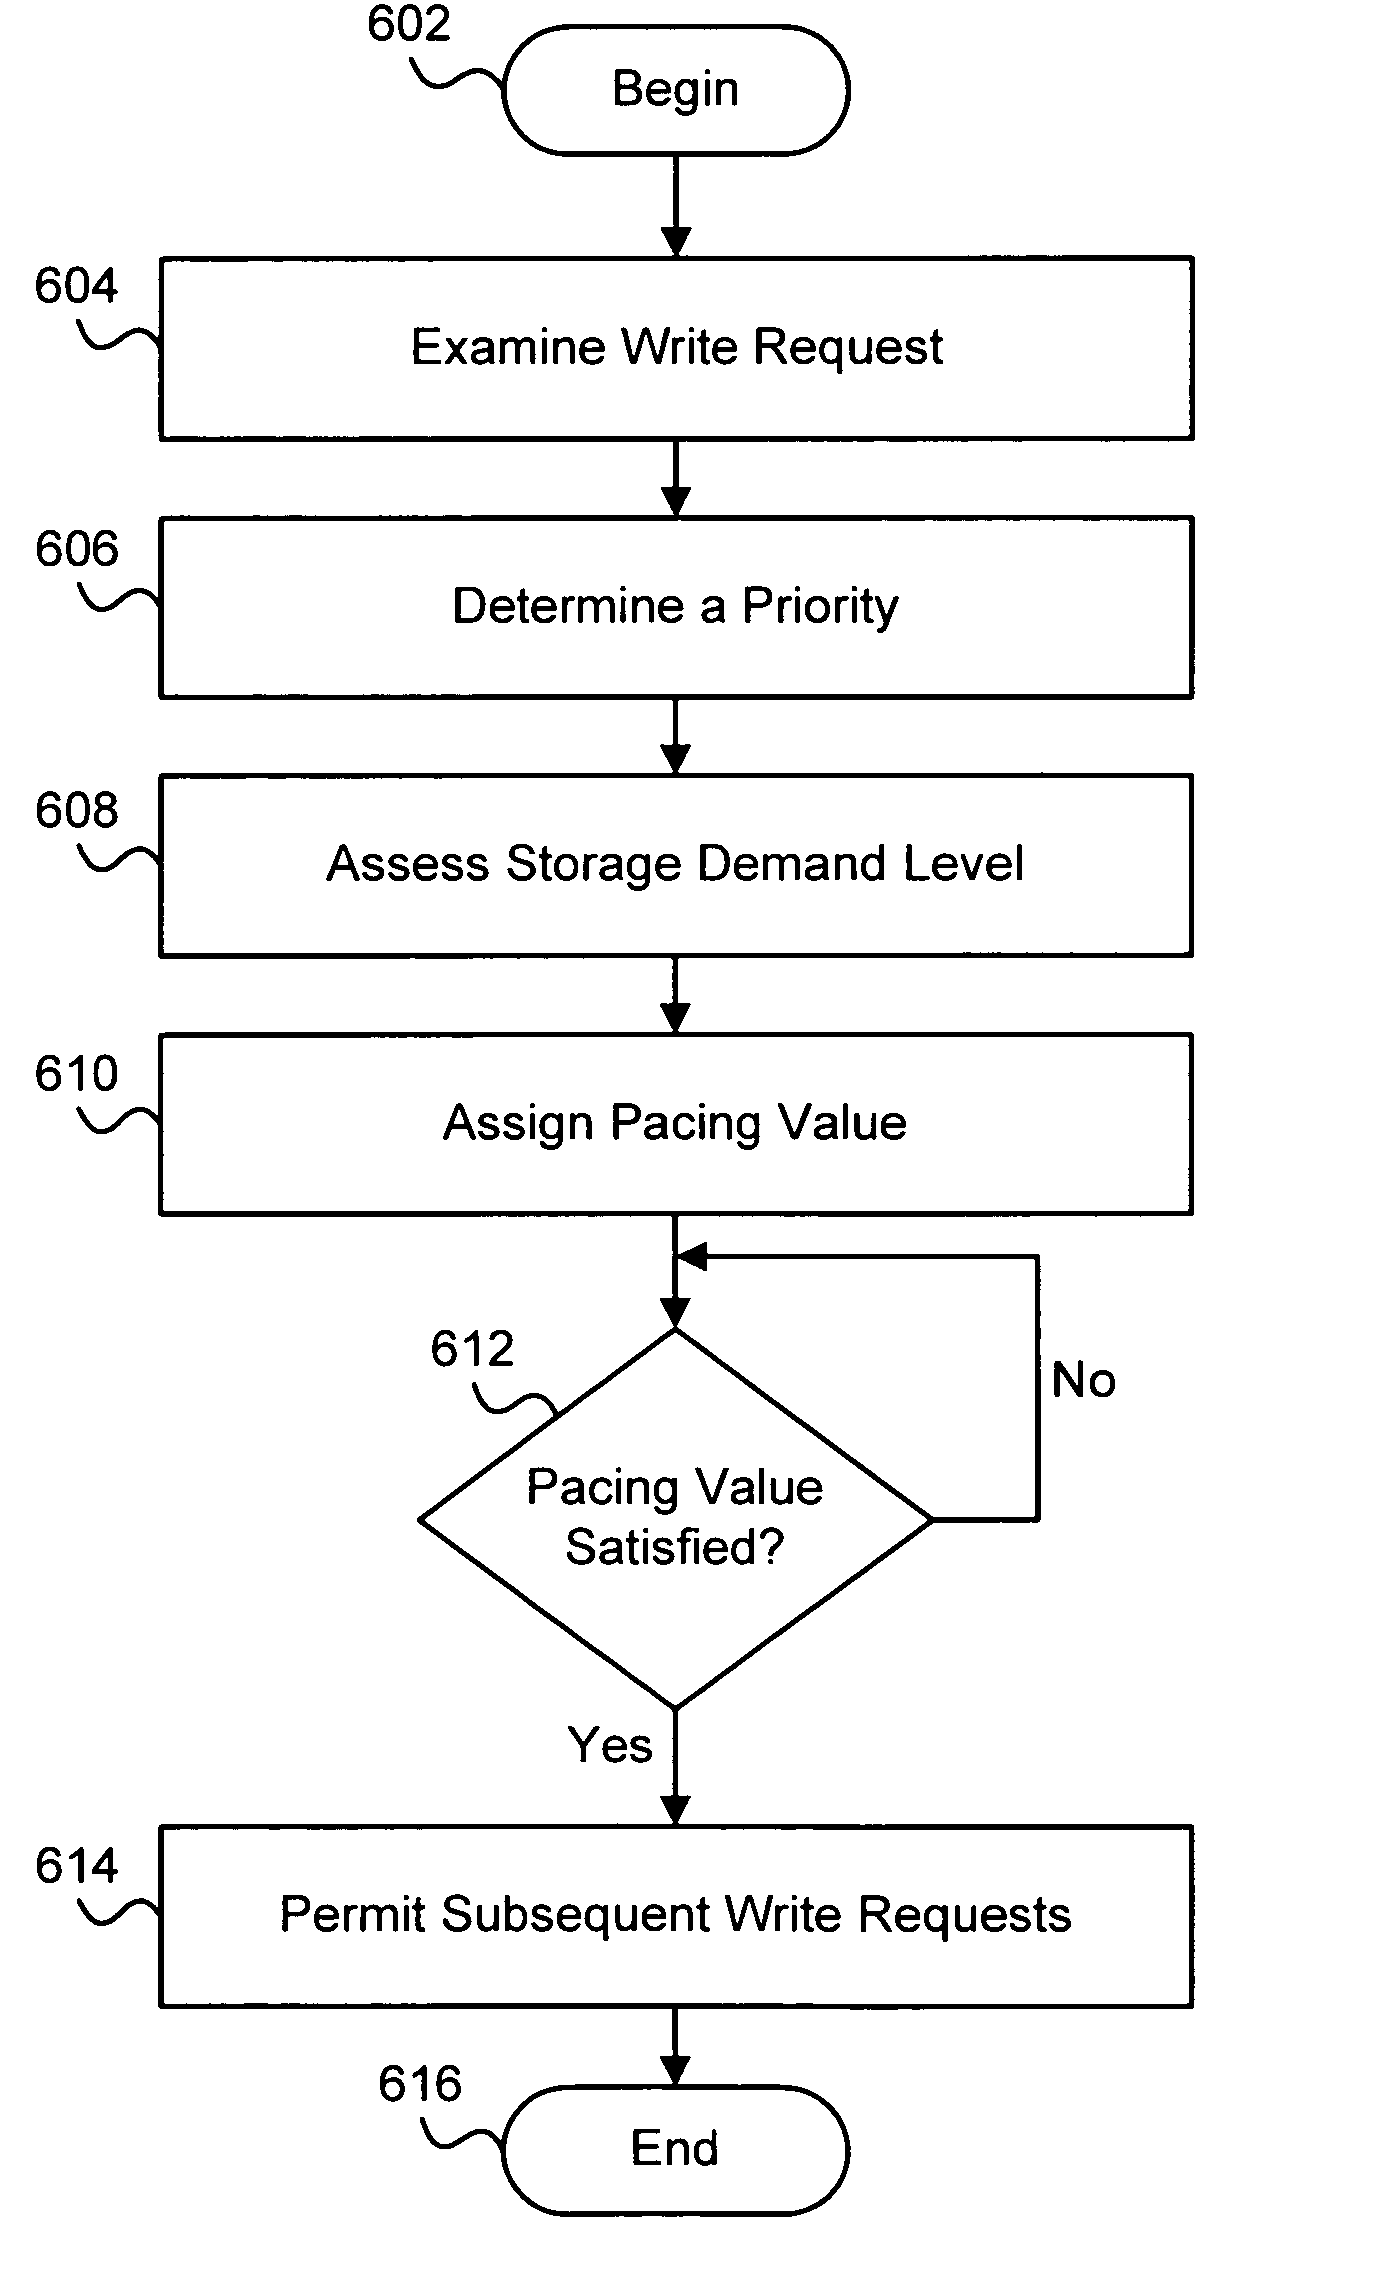 Apparatus, system, and method for regulating the number of write requests in a fixed-size cache